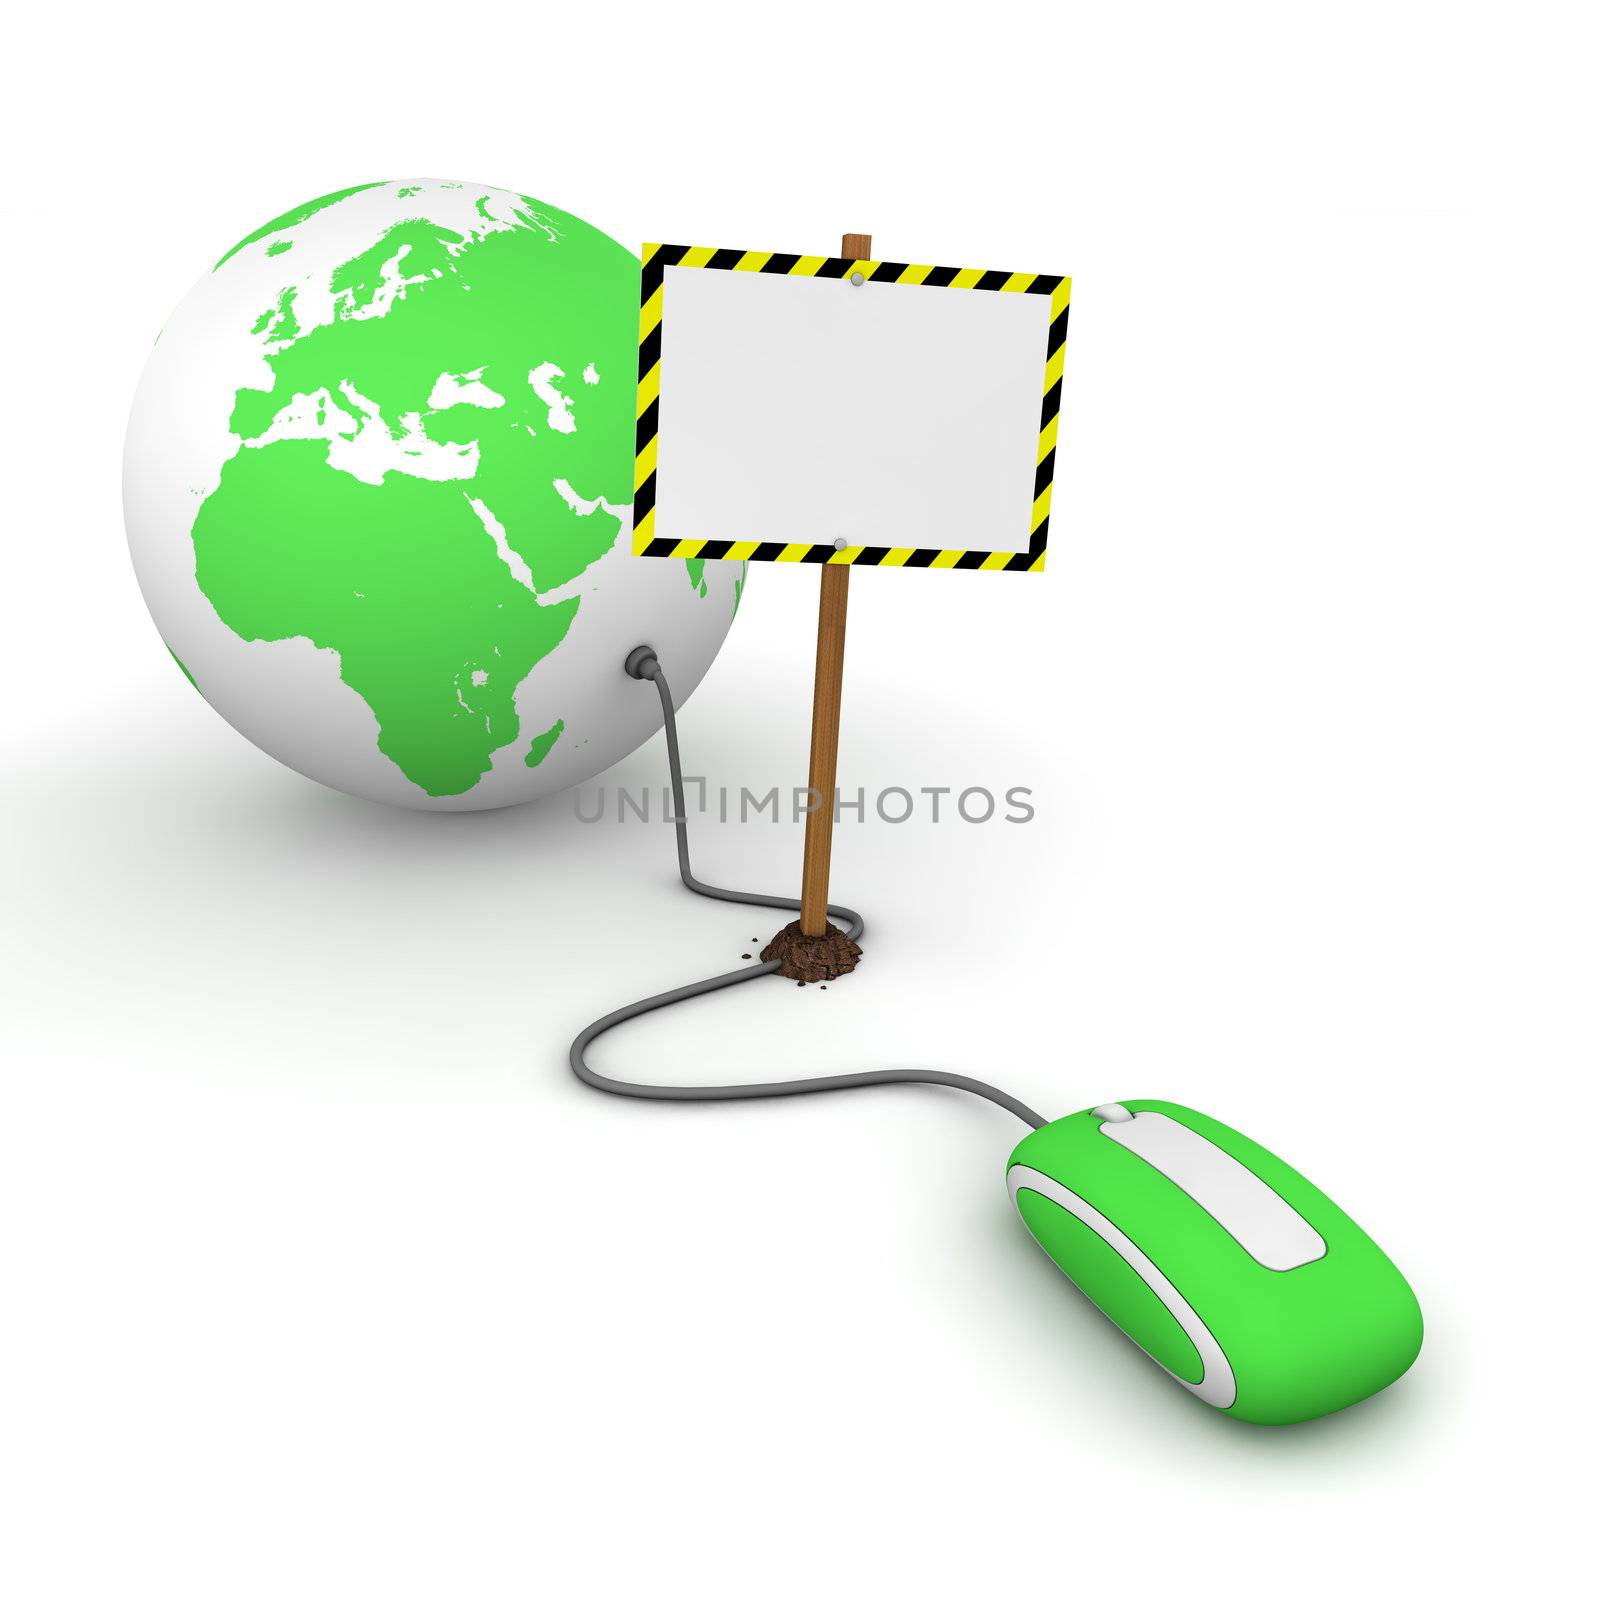 green computer mouse is connected to a green globe - surfing and browsing is blocked by a white rectangular sign that cuts the cable - empty template with yellow and black warning stripes